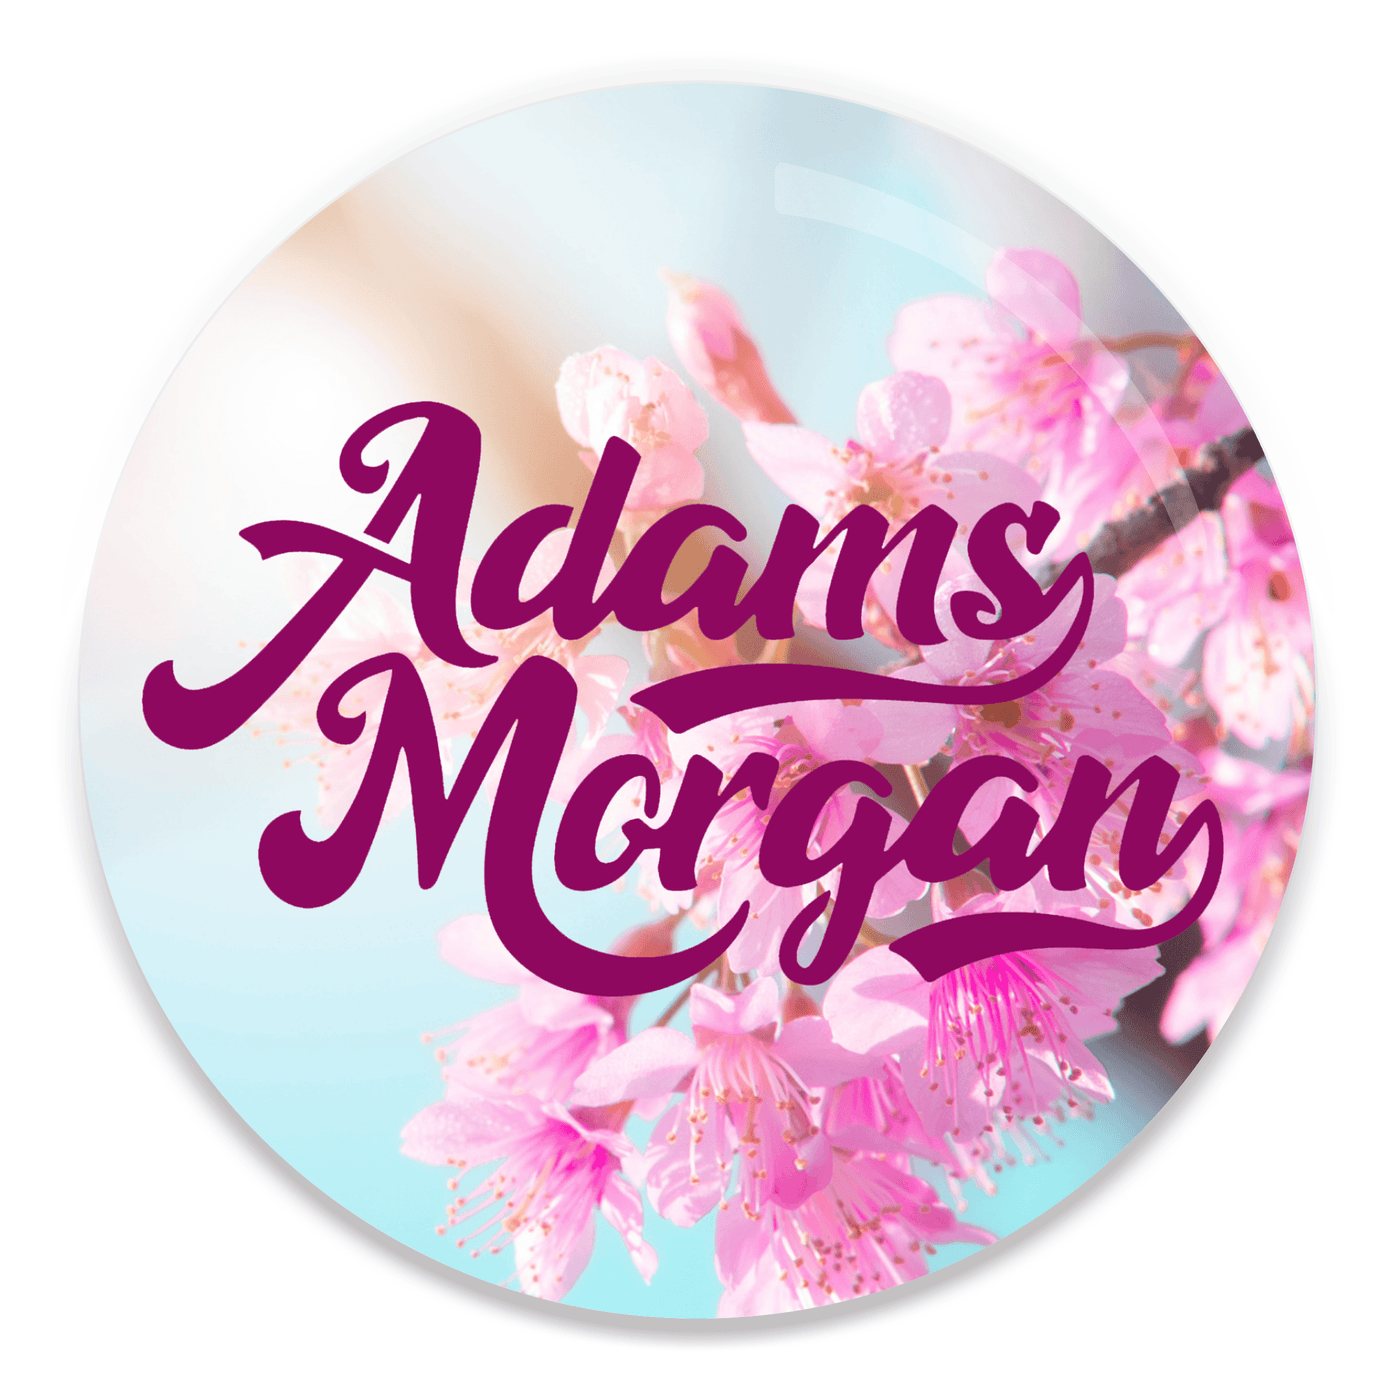 2.25 inch round colorful magnet with image of Adams Morgan text and cherry blossoms